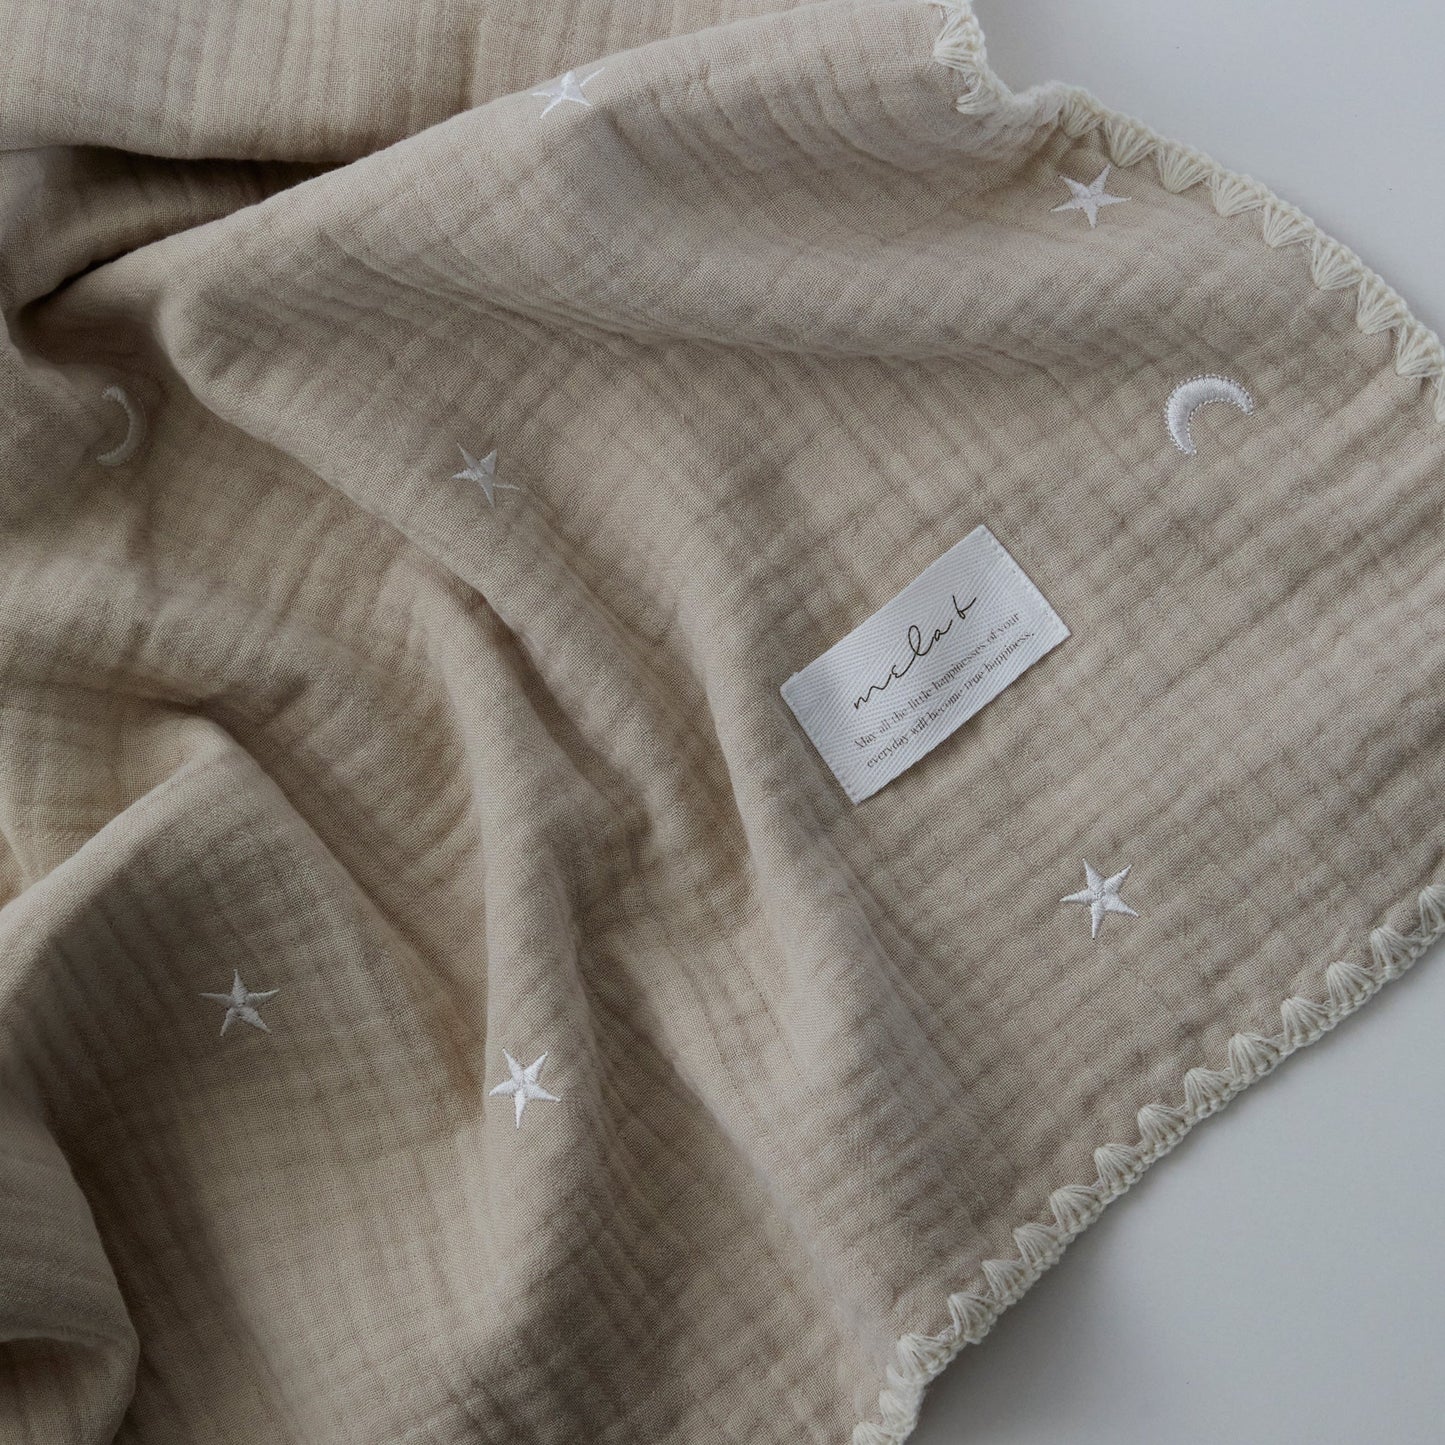 6 Layer Gauze Blanket Embroide Star & Moon